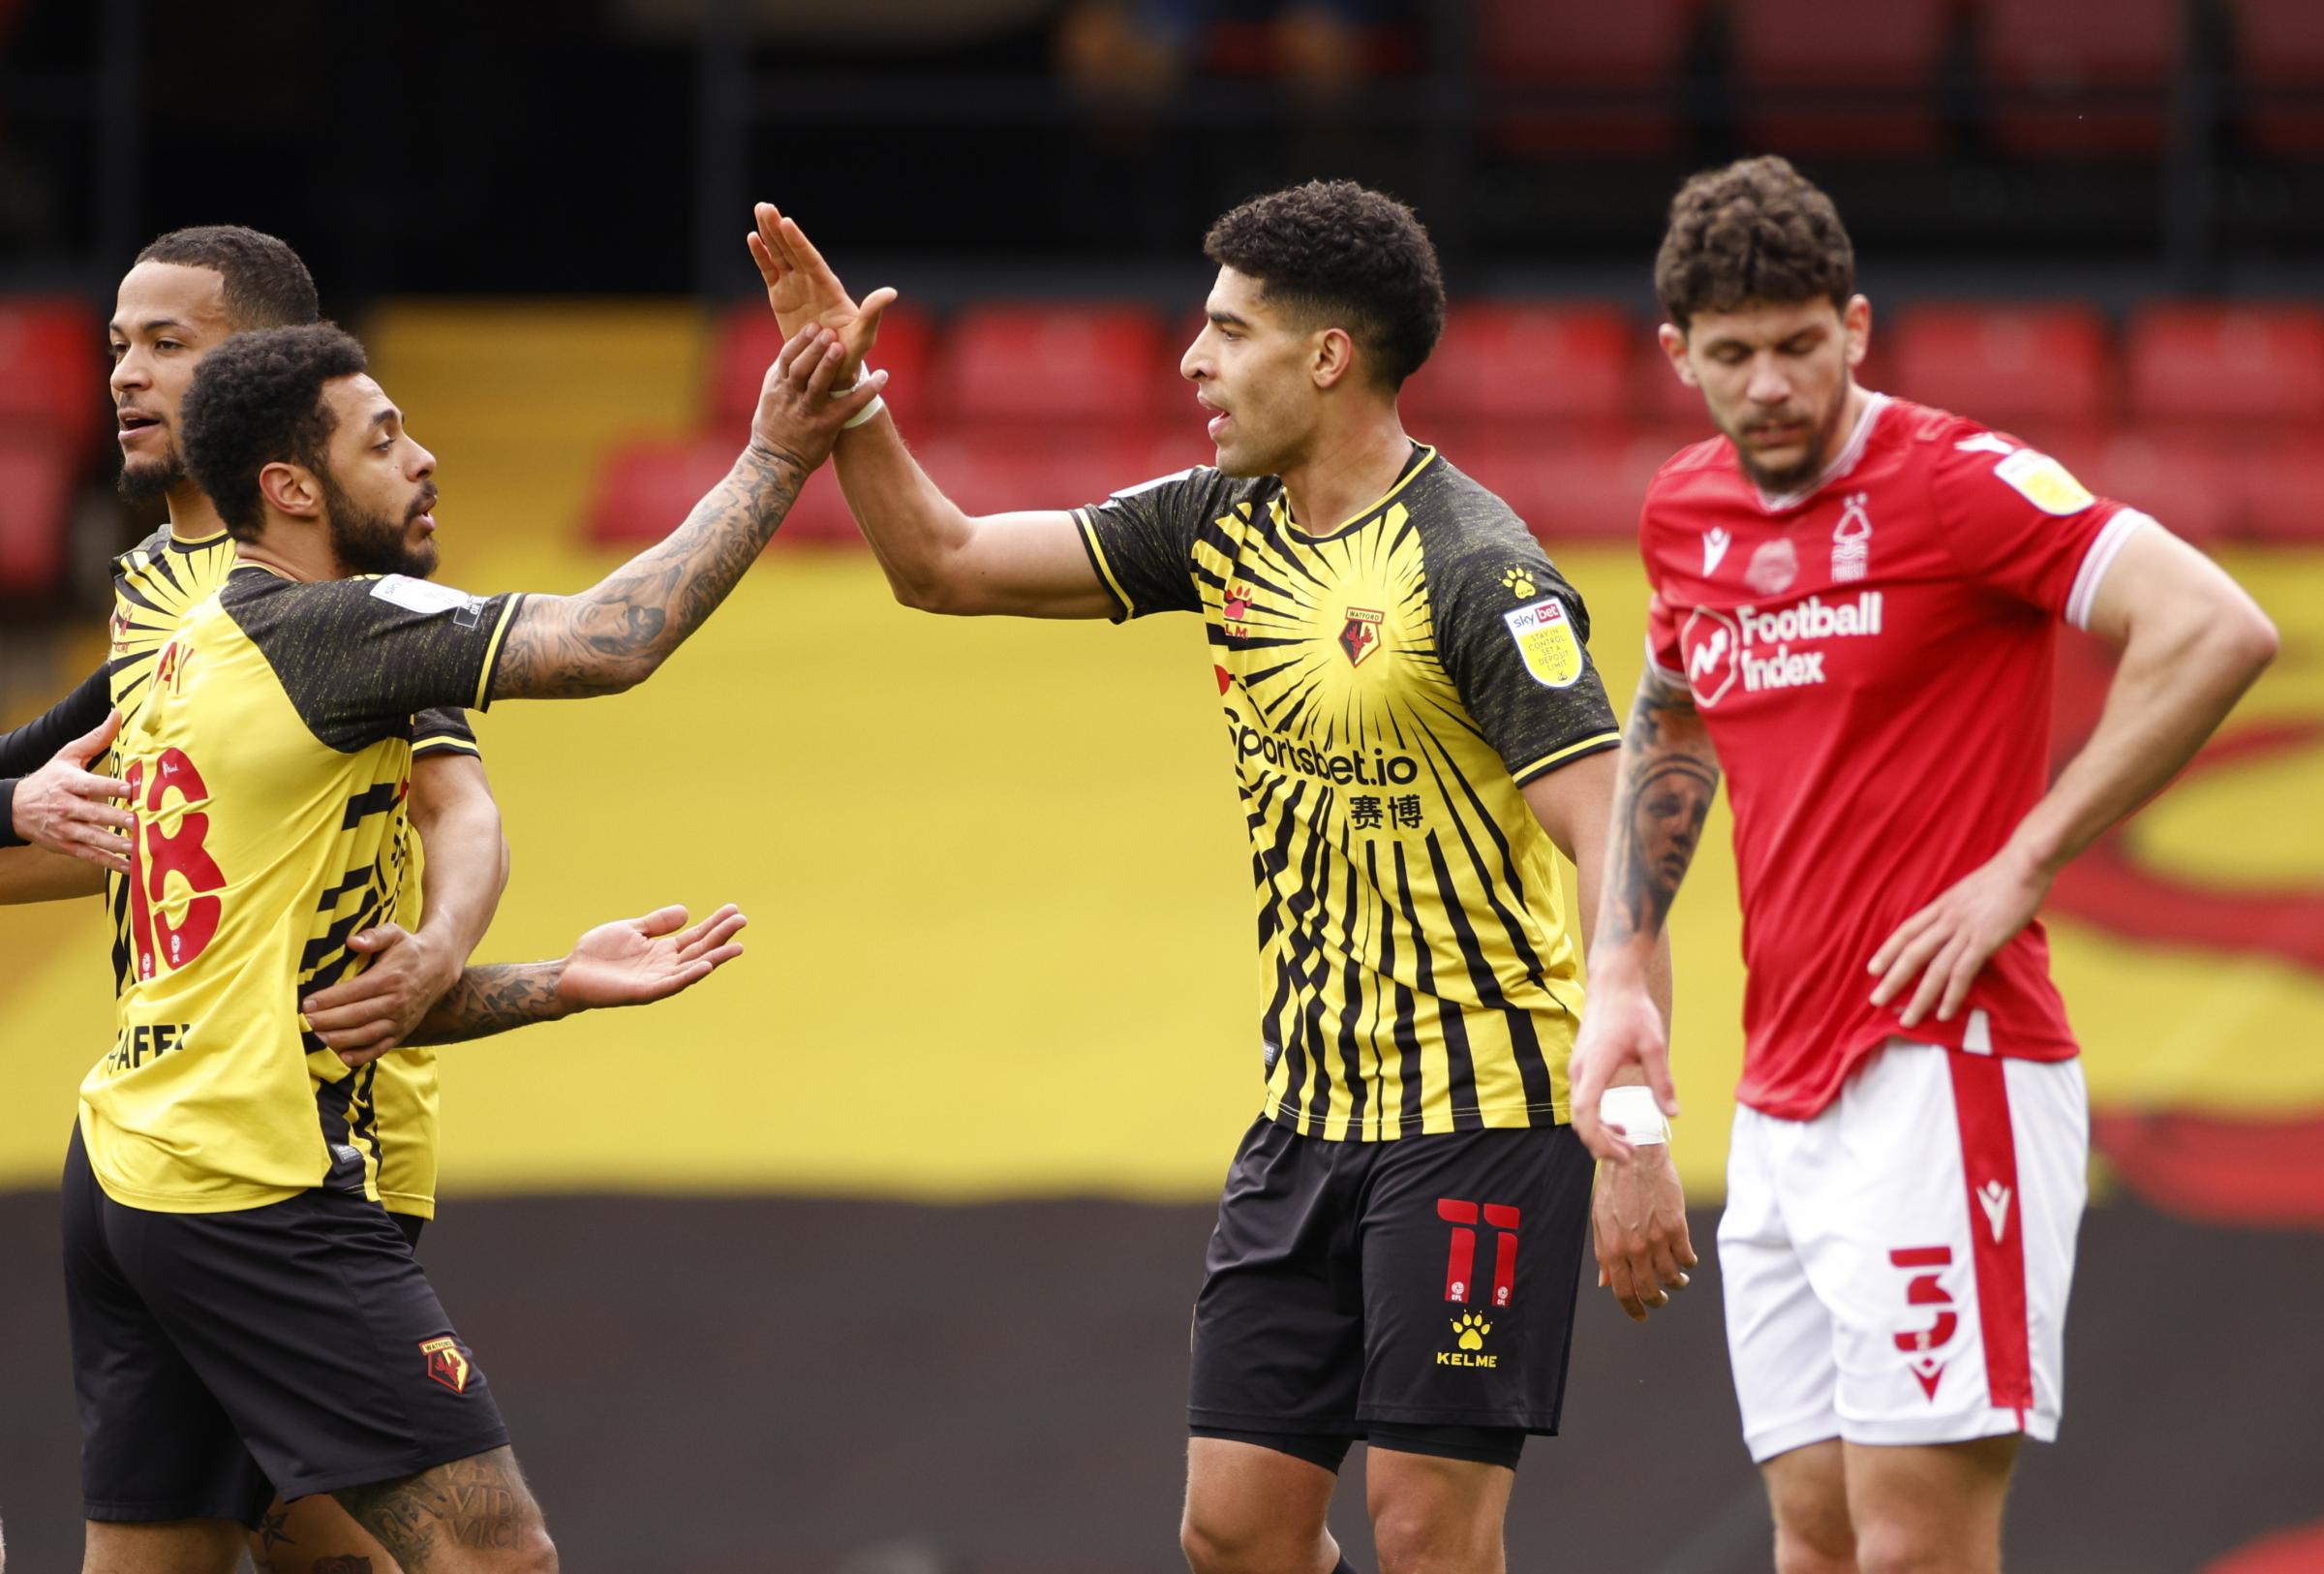 Watford beat Nottingham Forest to go second in the Championship